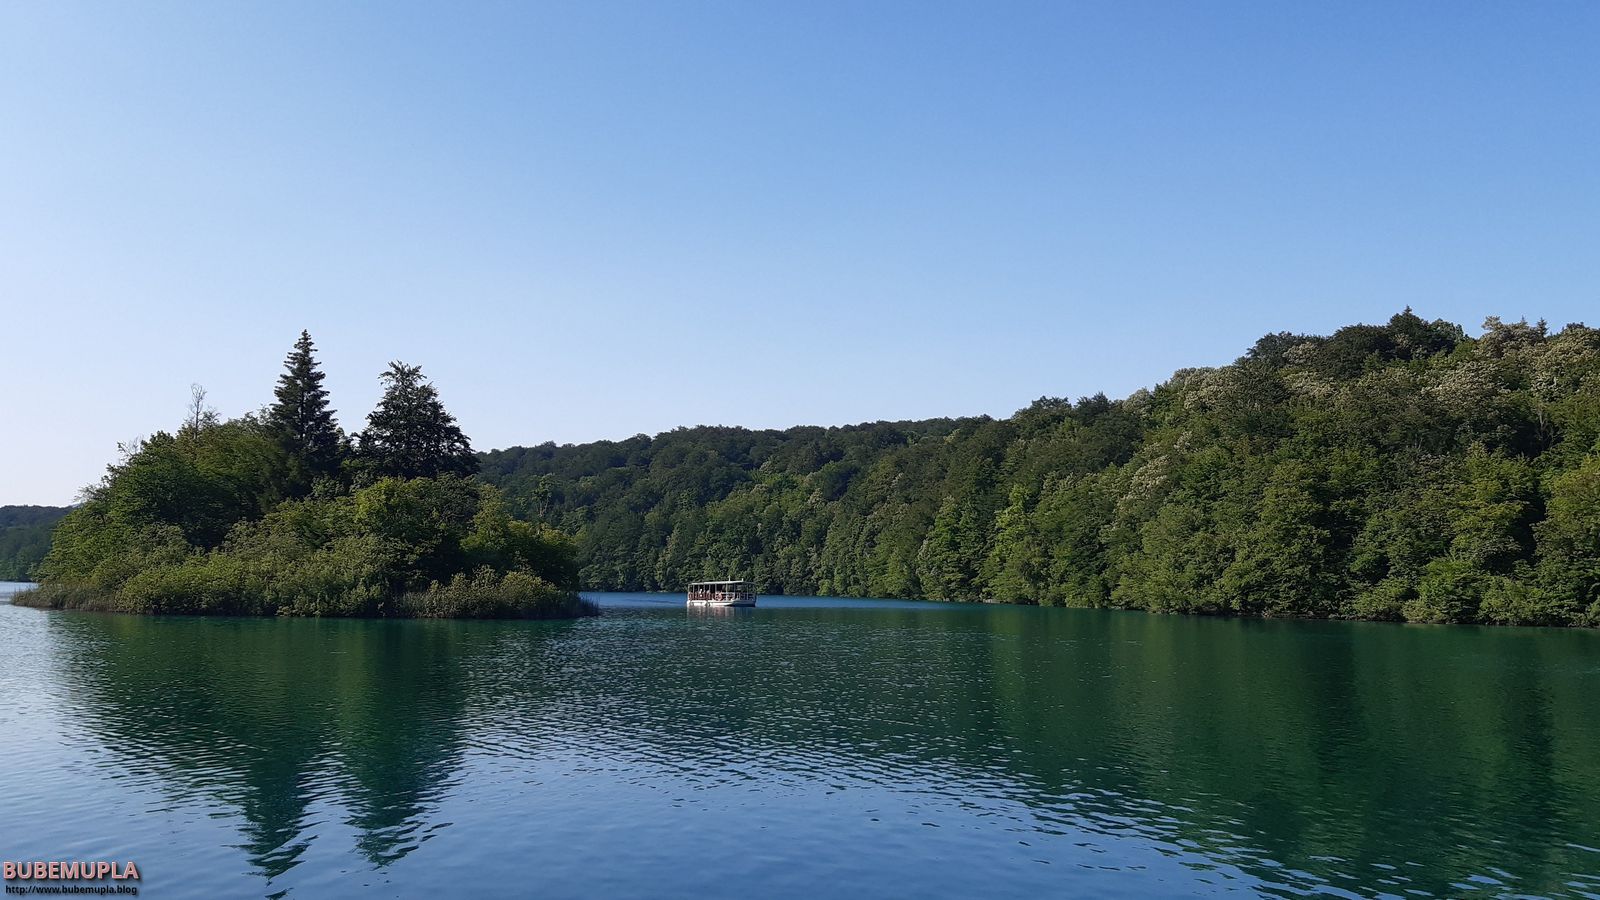 Chapter 10 in which we actually go to Plitvice lakes